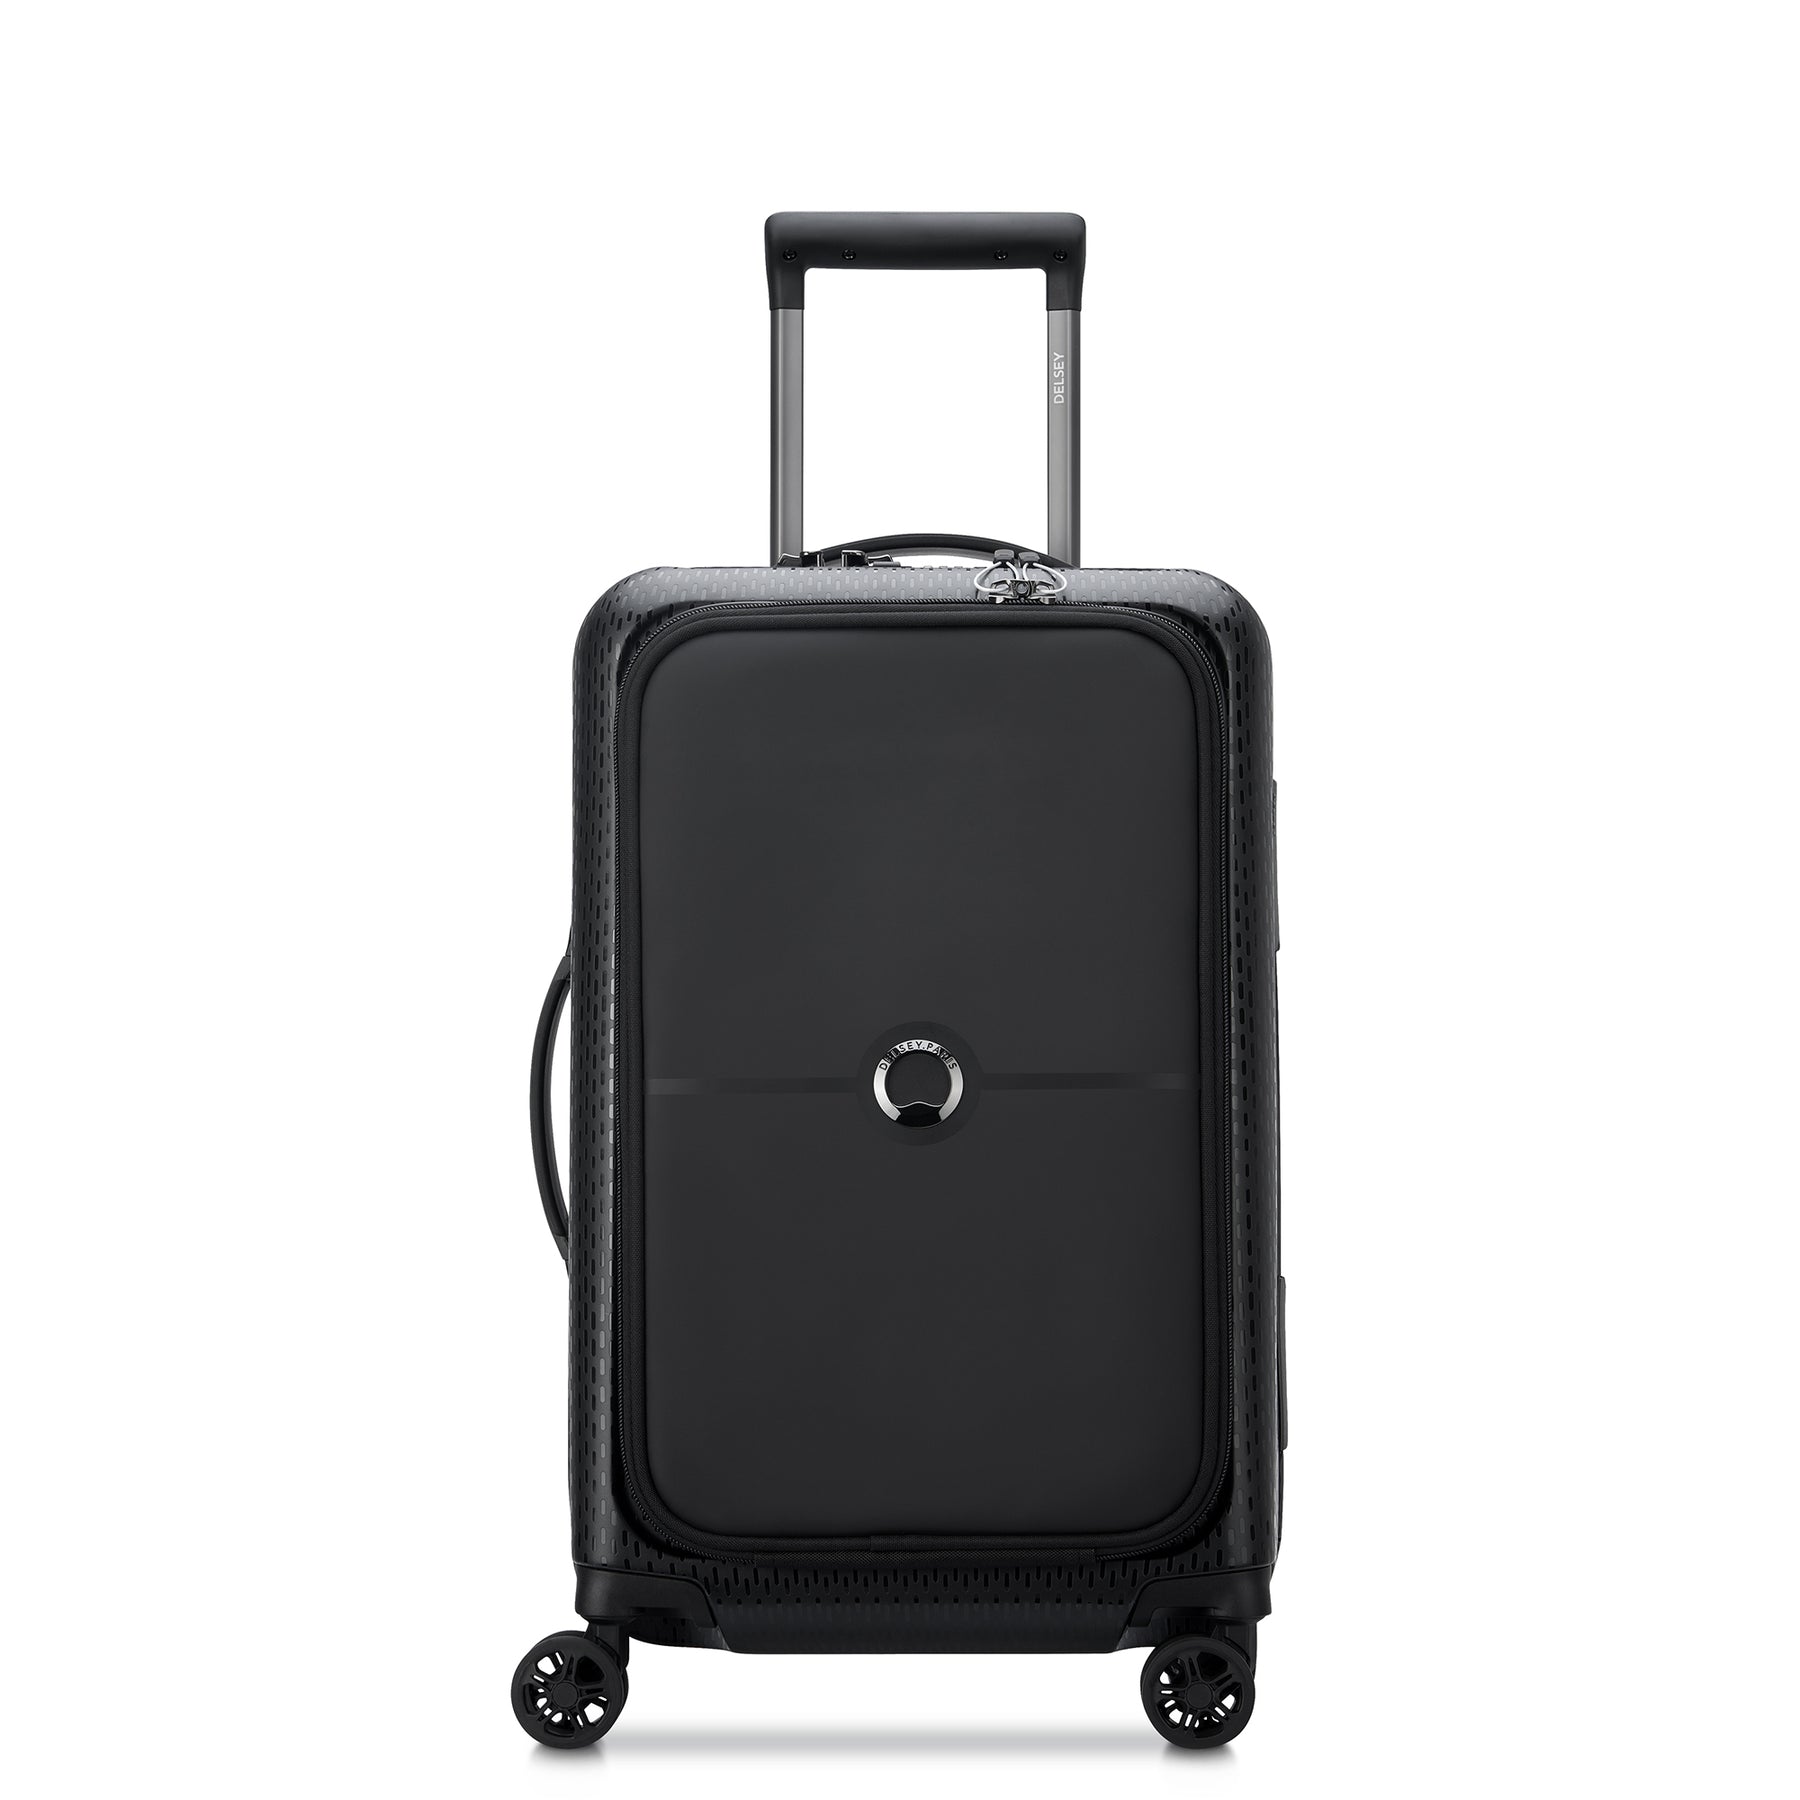 Delsey Turenne 21" Carry-On with Soft Pocket – Luggage Pros